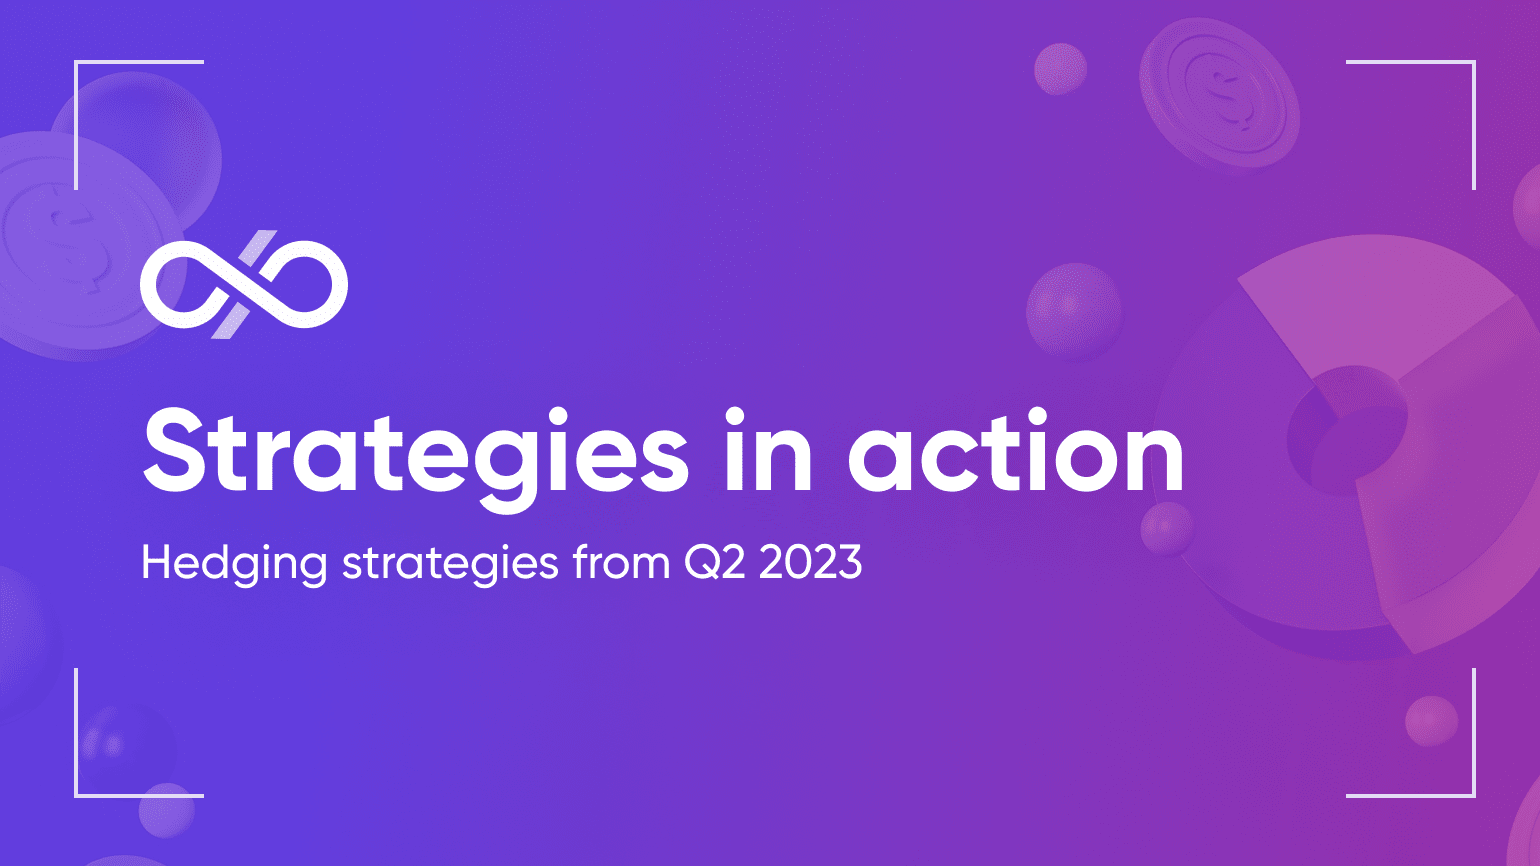 Hedging Strategies from Q2 2023